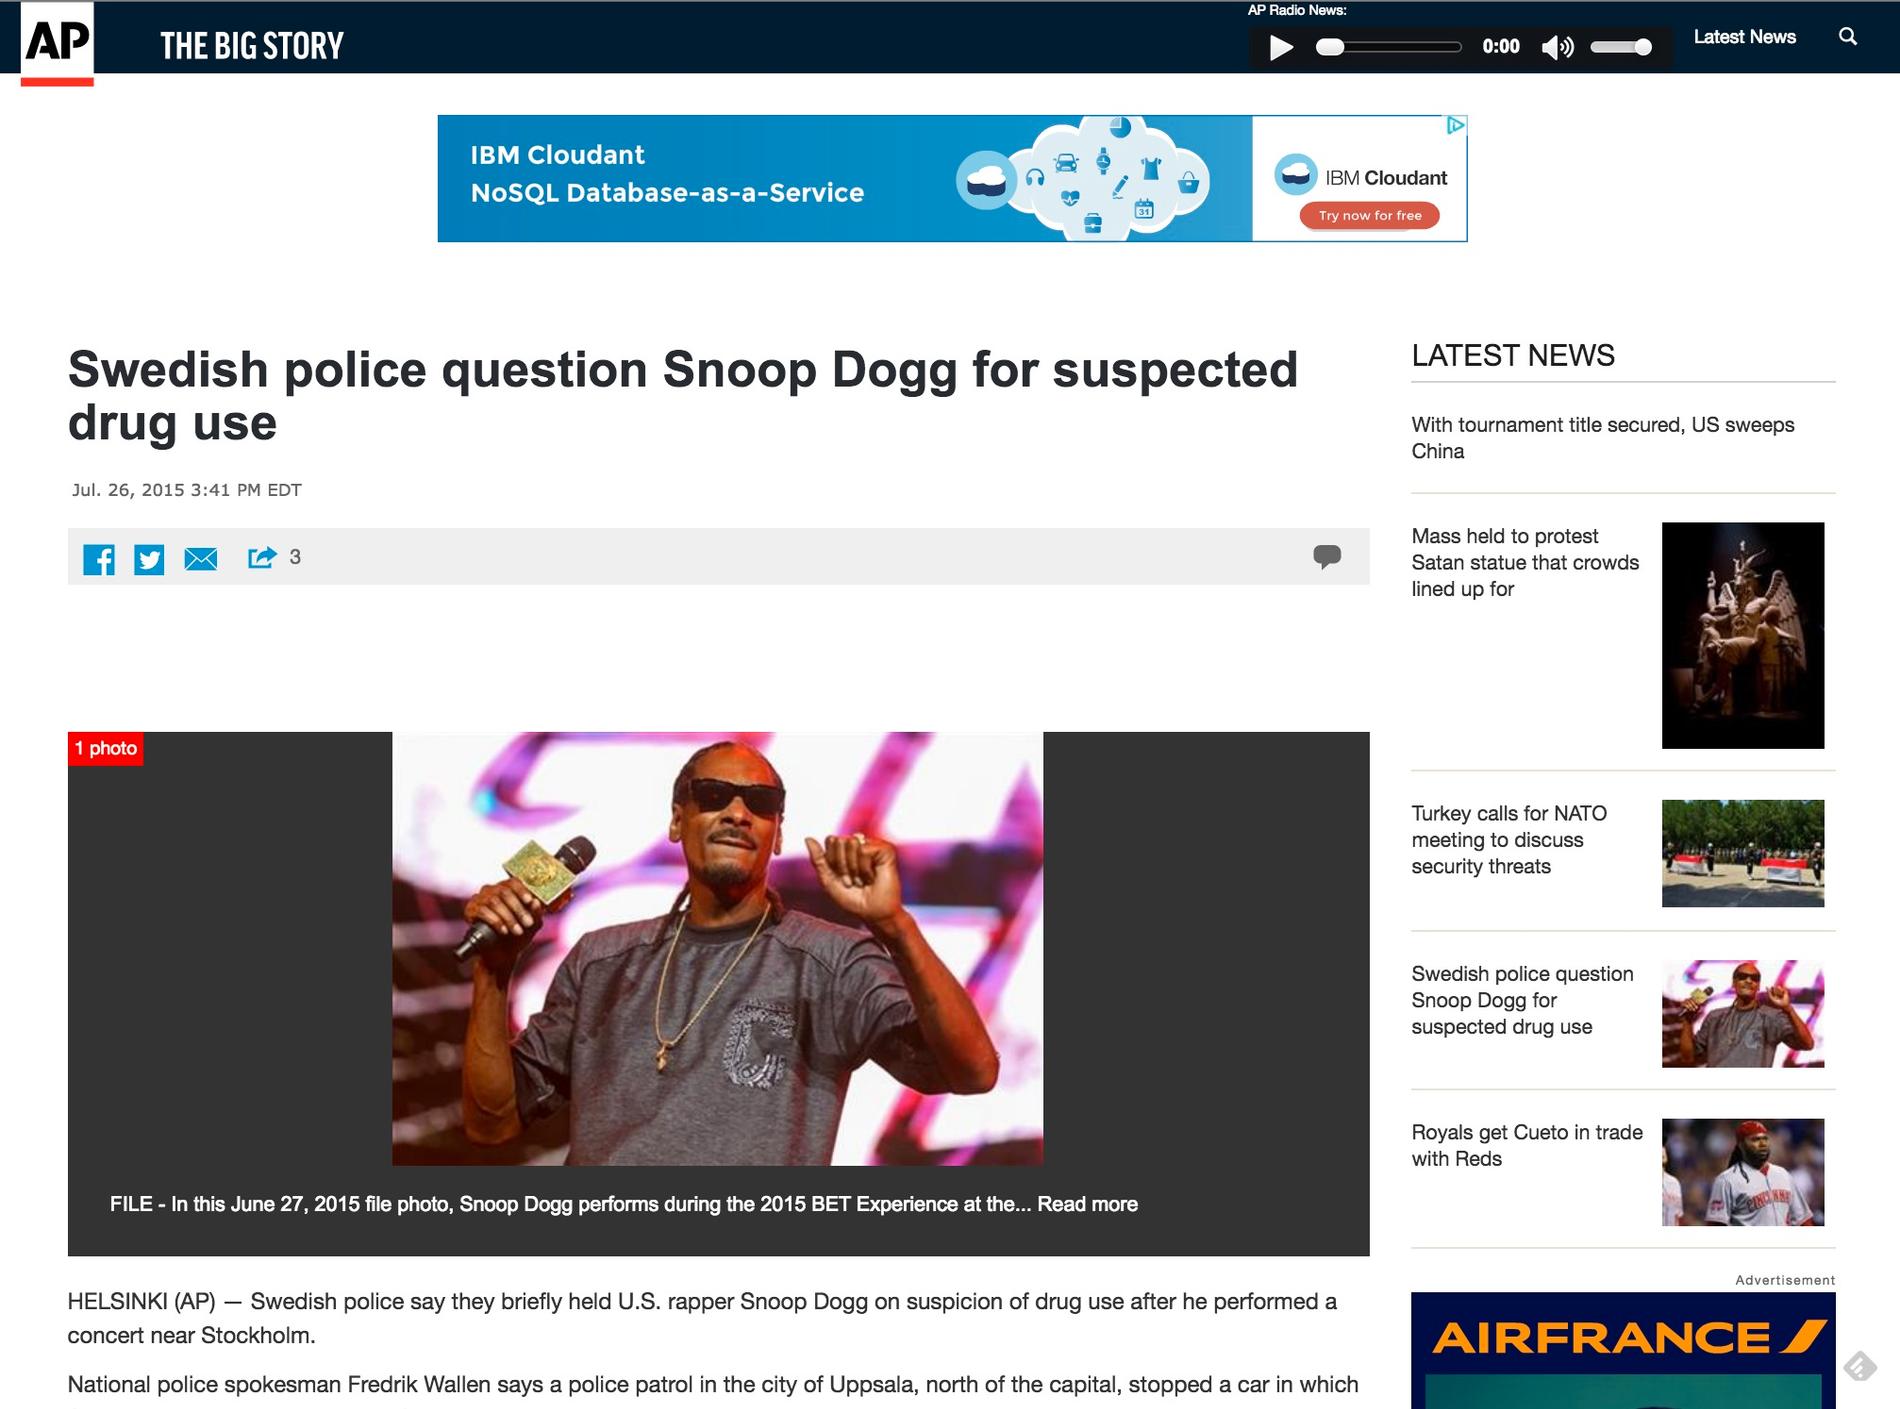 Swedish police question Snoop Dogg for suspected drug use